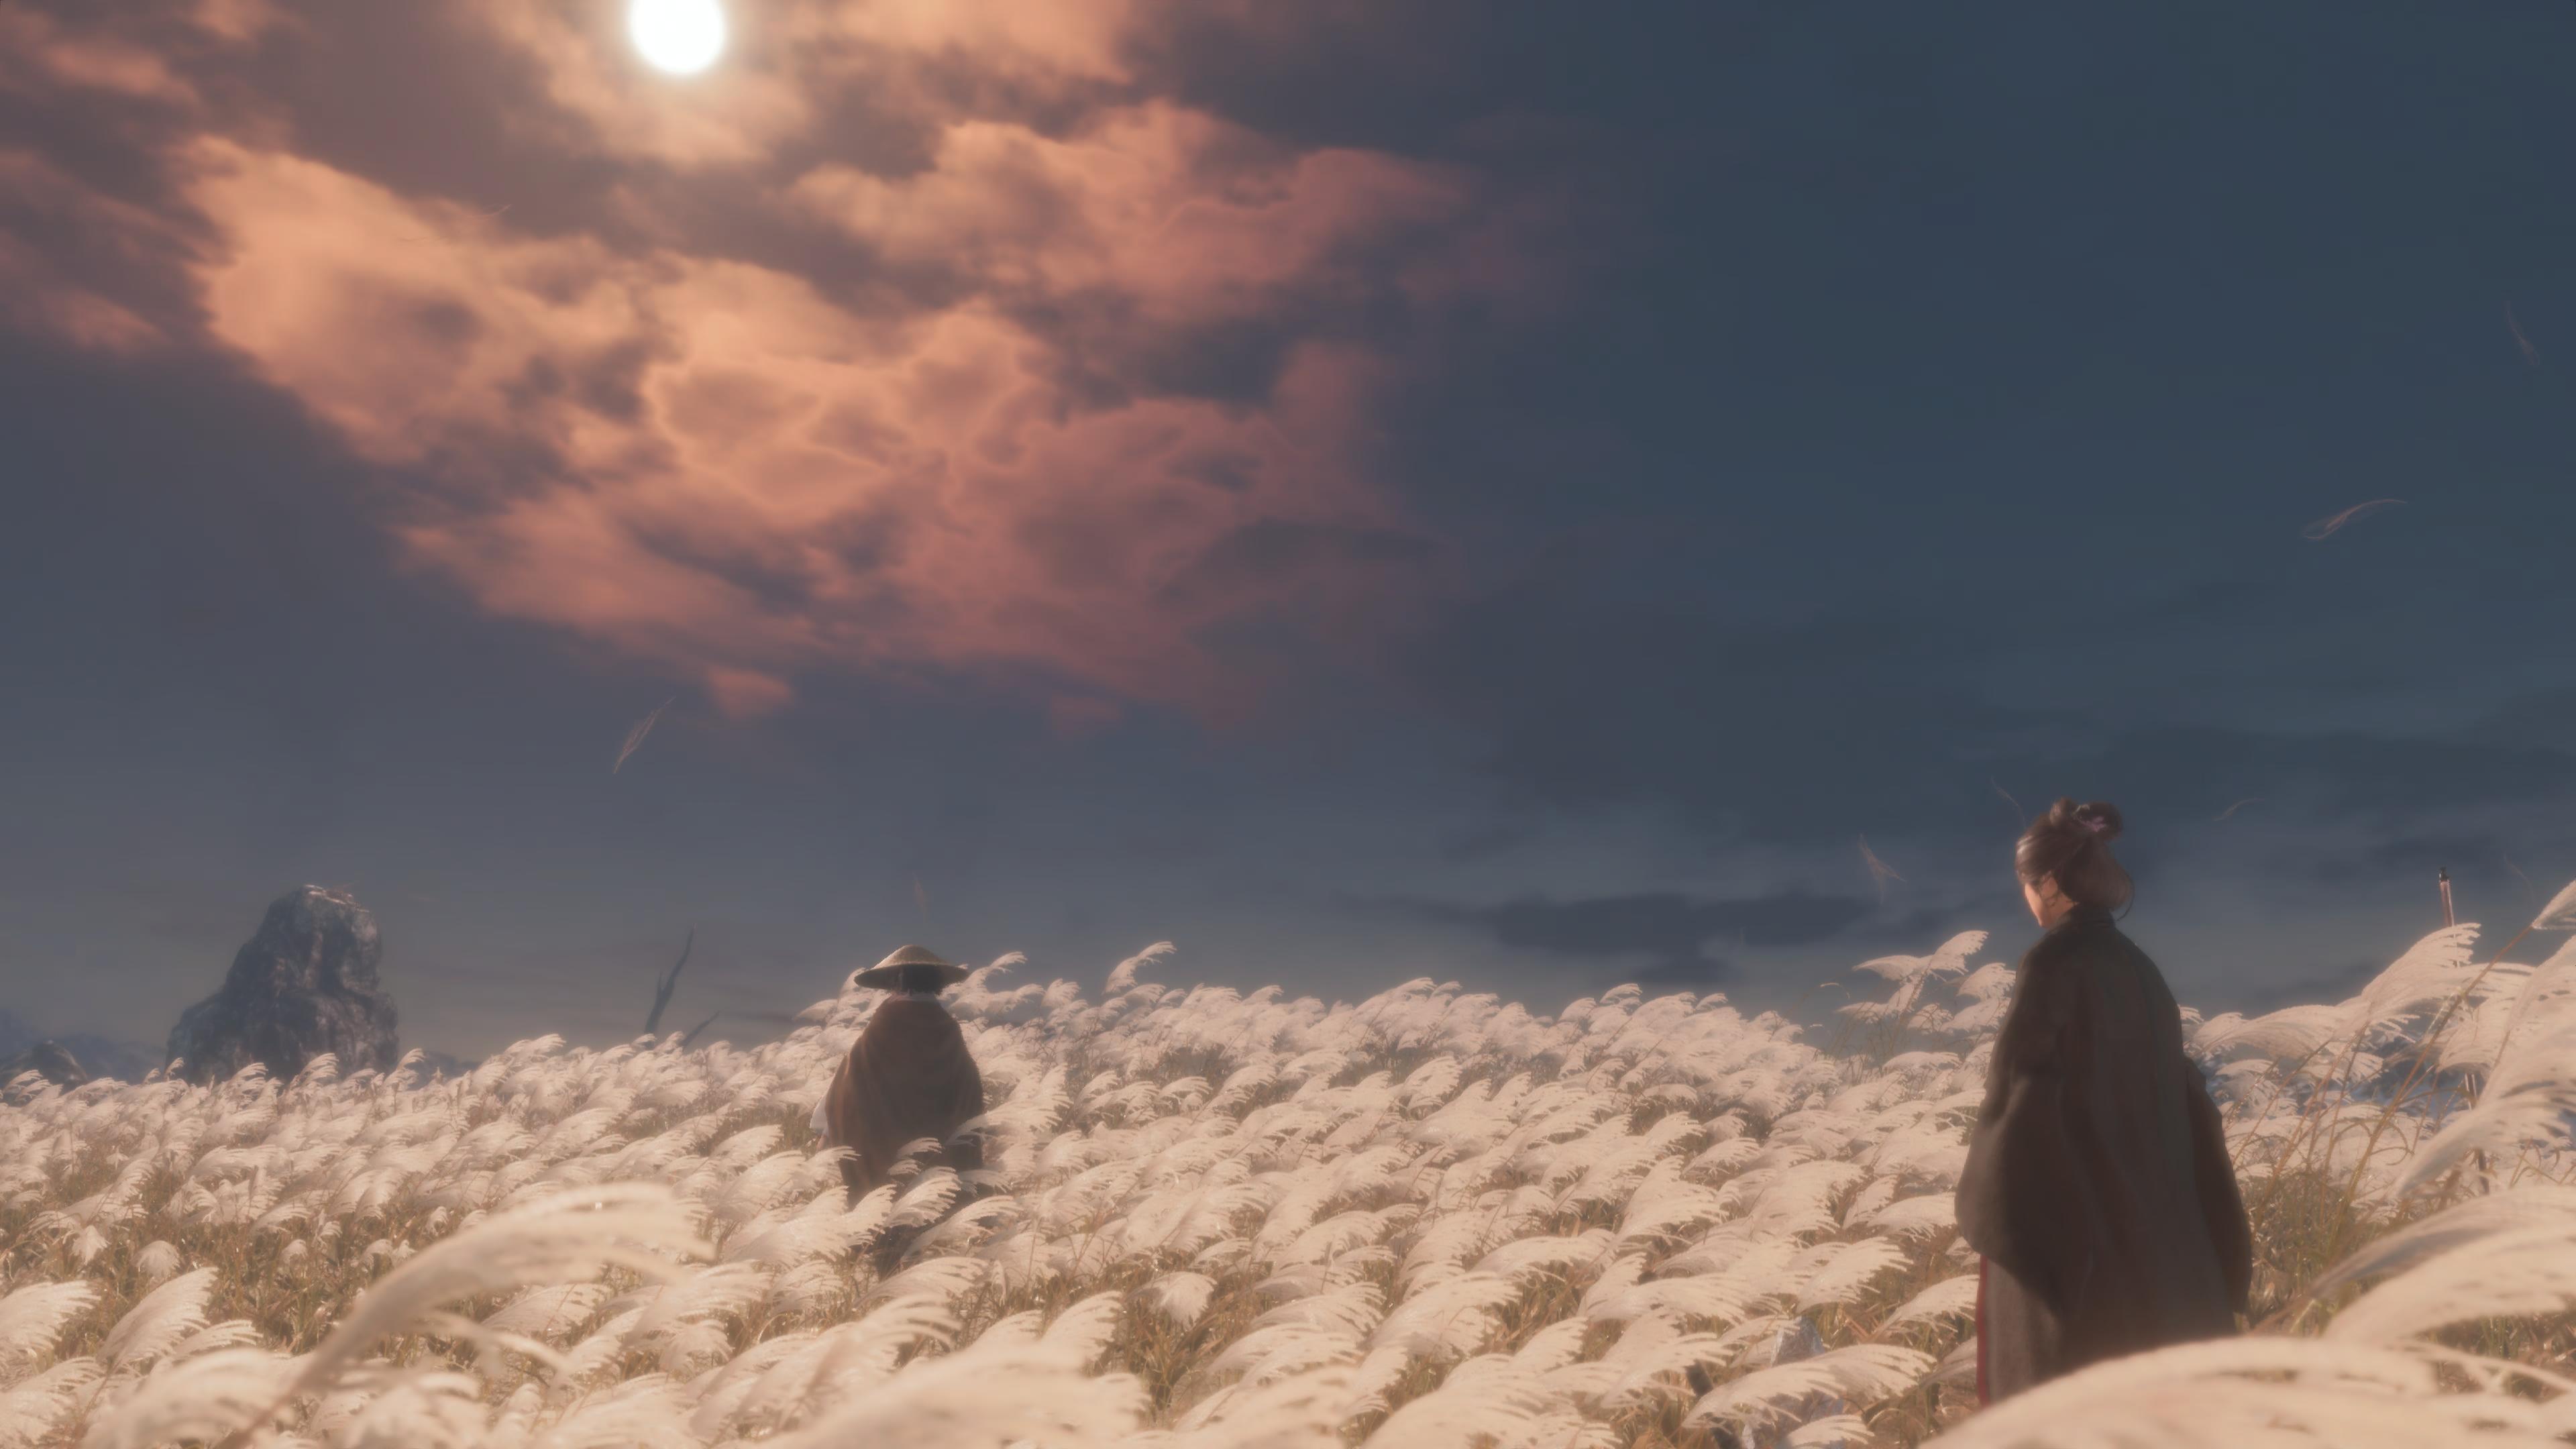 Sekiro Shadows Die Twice Video Game Characters From Software 3840x2160